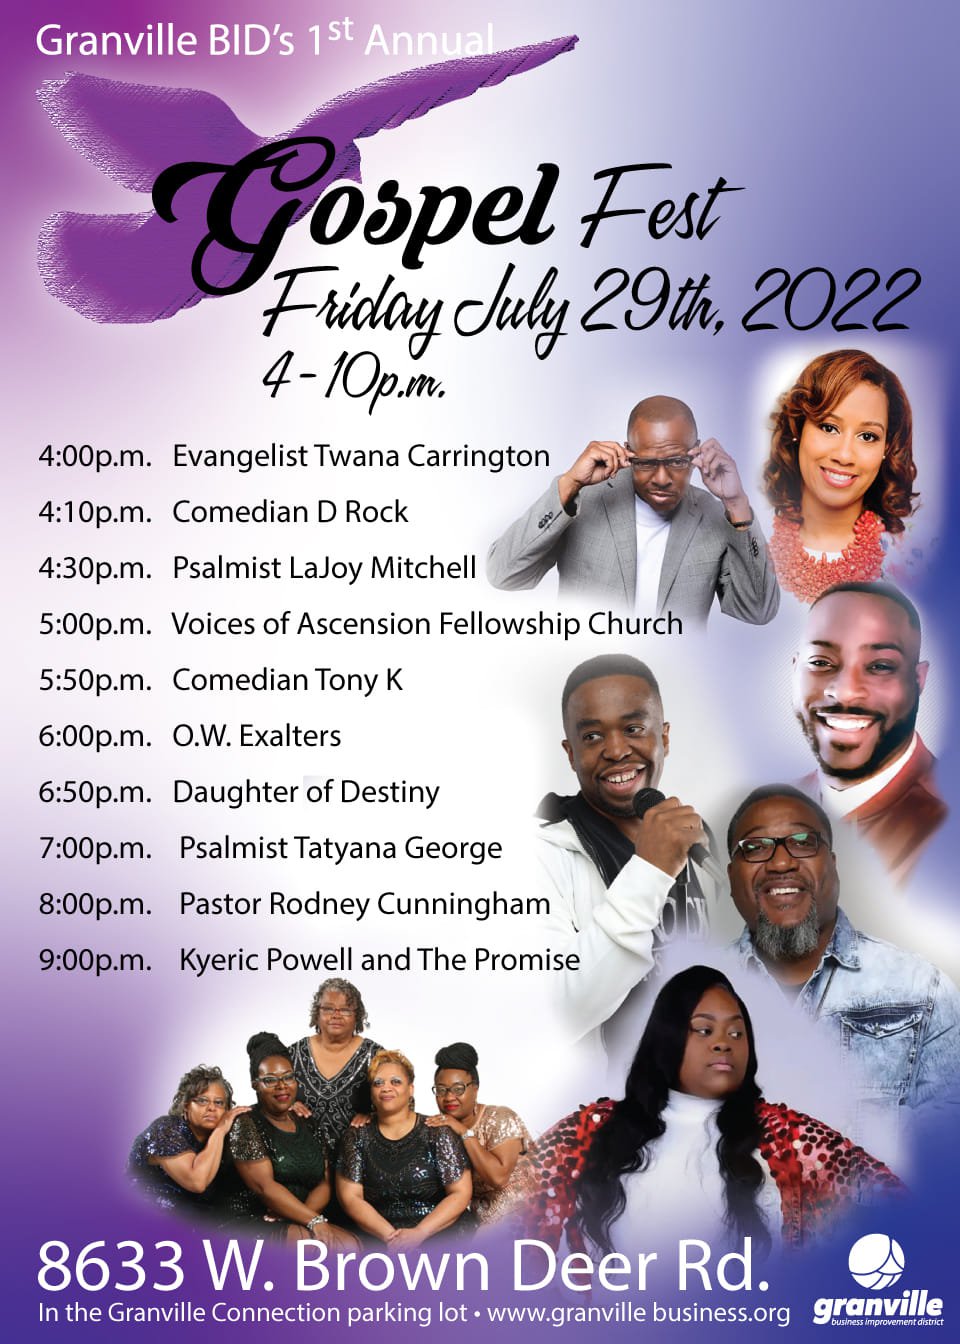 Outstanding and Varied Lineup at Friday’s Gospel Fest Shepherd Express